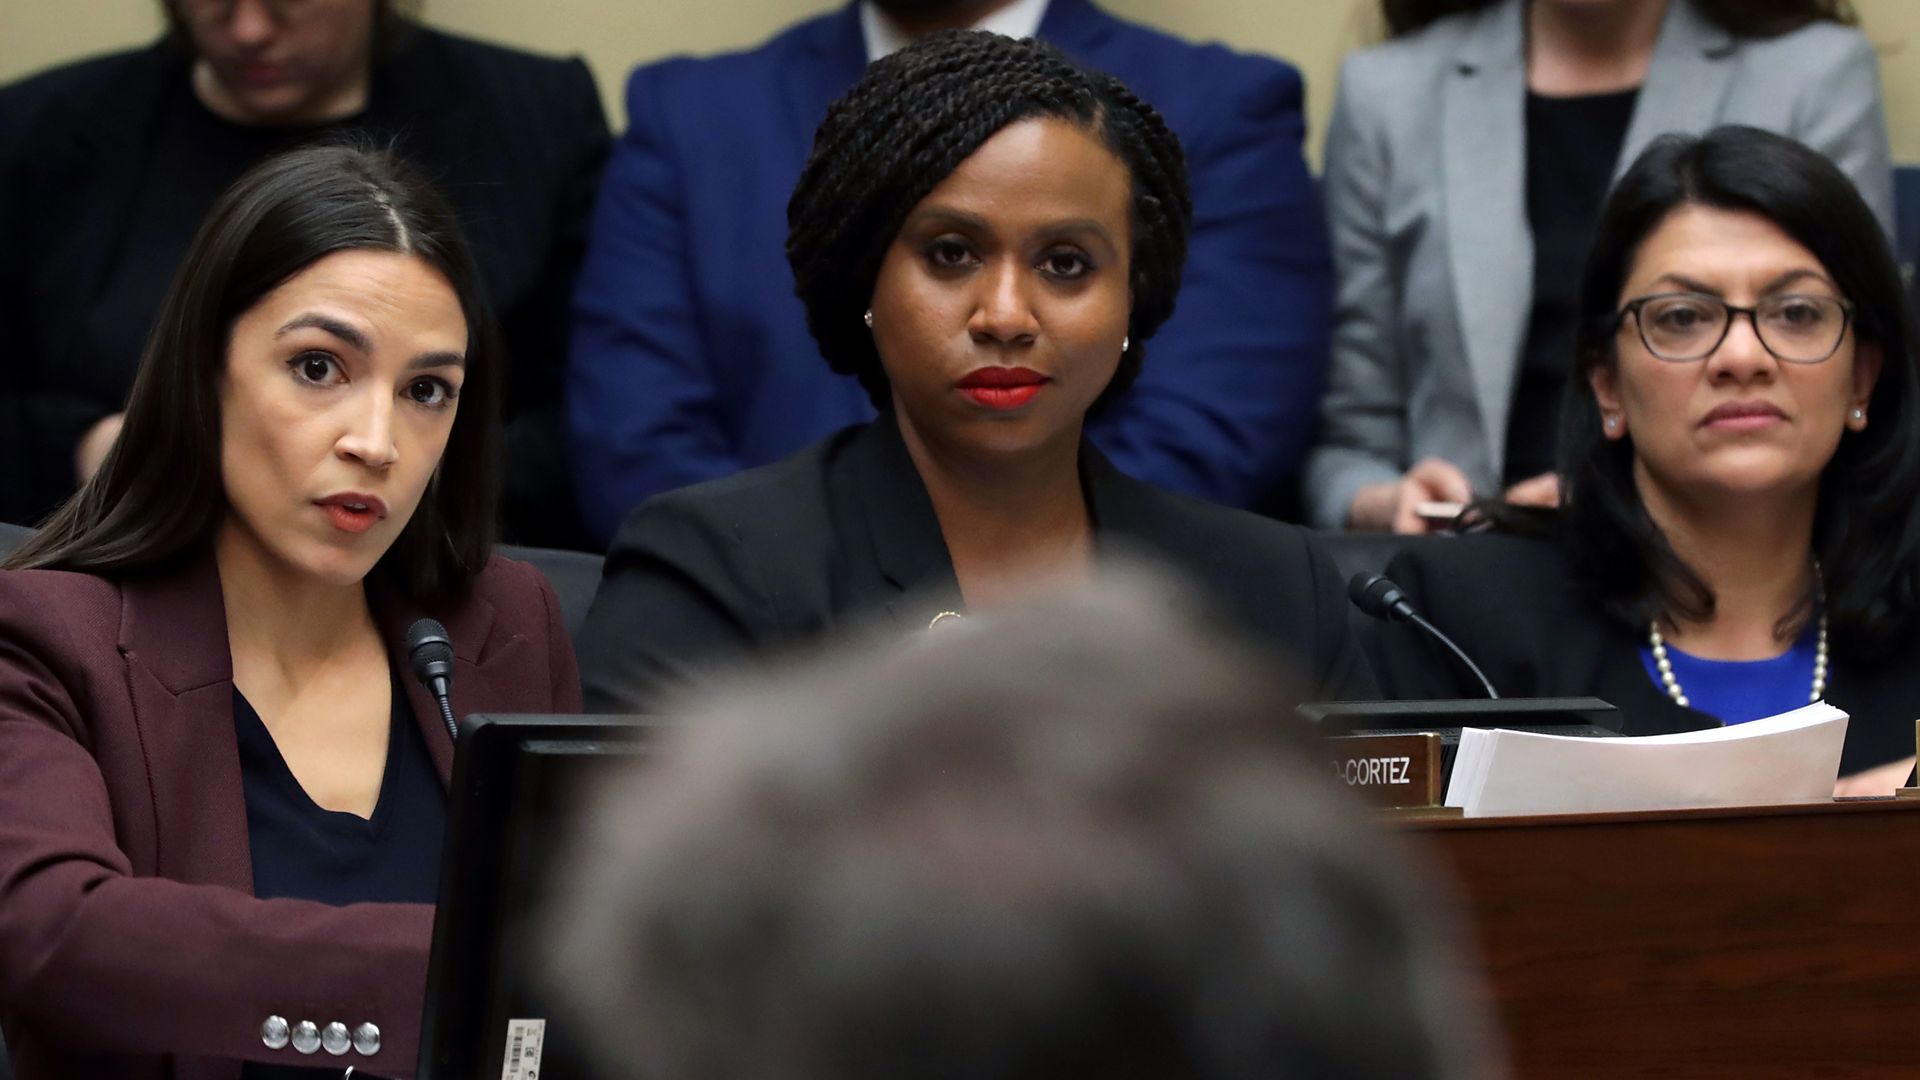 Rep. Alexandria Ocasio-Cortez (D-NY), Rep. Ayanna Pressley (D-MA) and Rep. Rashida Tlaib (D-MI) listen in the House Oversight Committee on Capitol Hill February 27, 2019 in Washington, DC